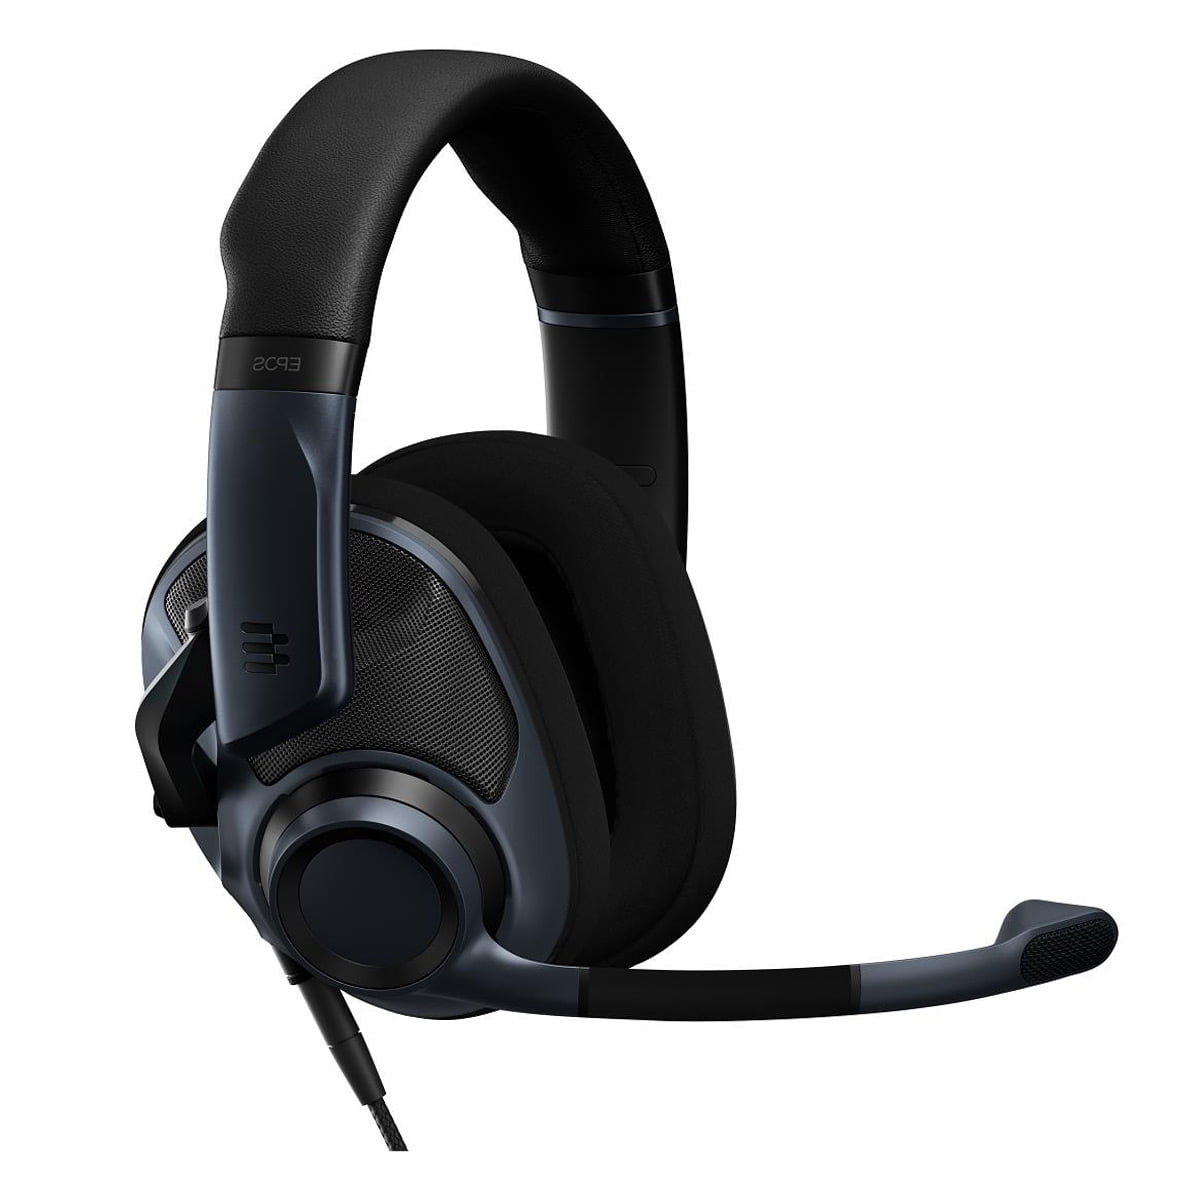 Unboxing video/EPOS H6 PRO gifted sound Gaming headset has less